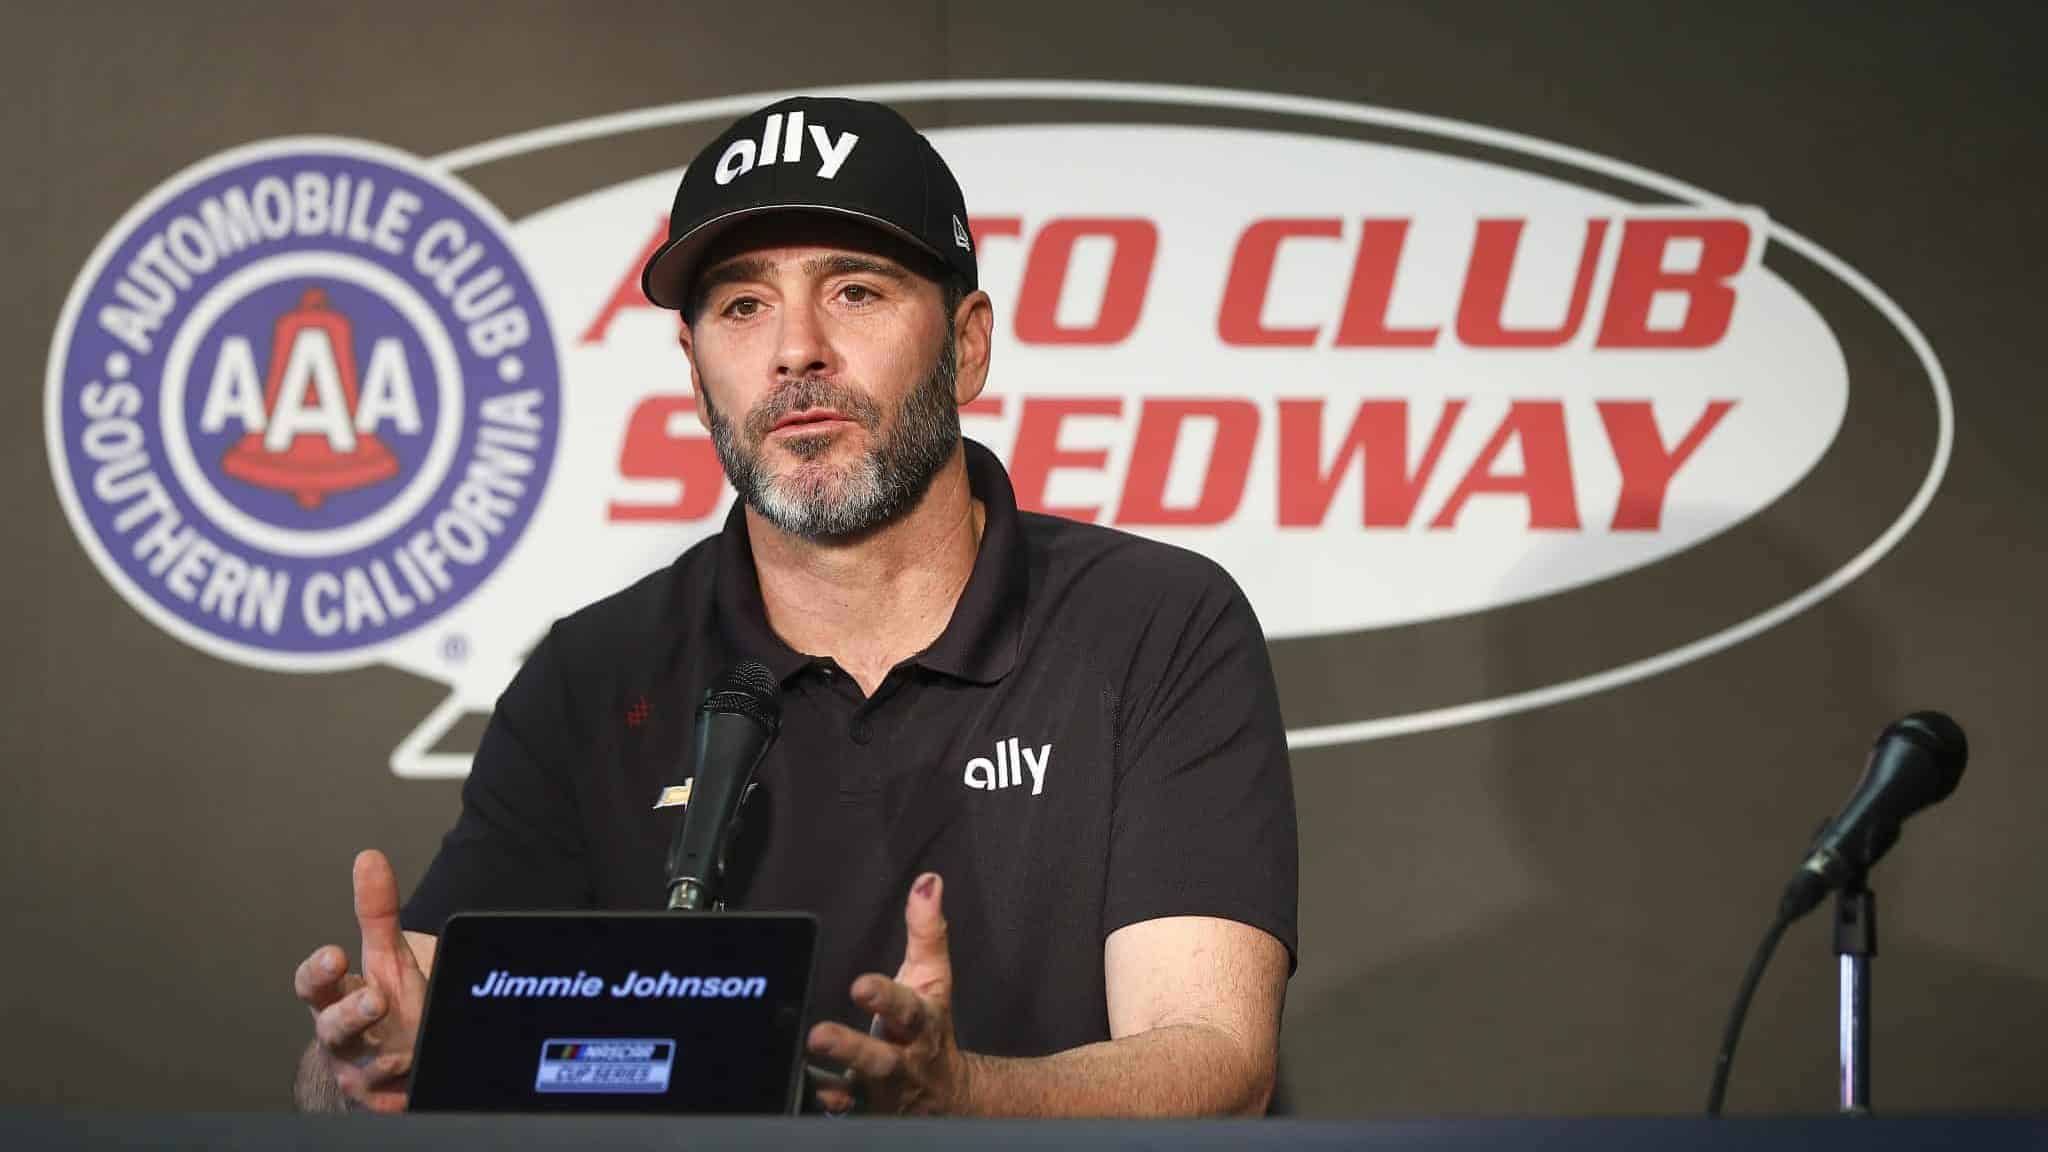 FONTANA, CALIFORNIA - FEBRUARY 28: Jimmie Johnson, driver of the #48 Ally Chevrolet, speaks ahead of practice at Auto Club Speedway on February 28, 2020 in Fontana, California.